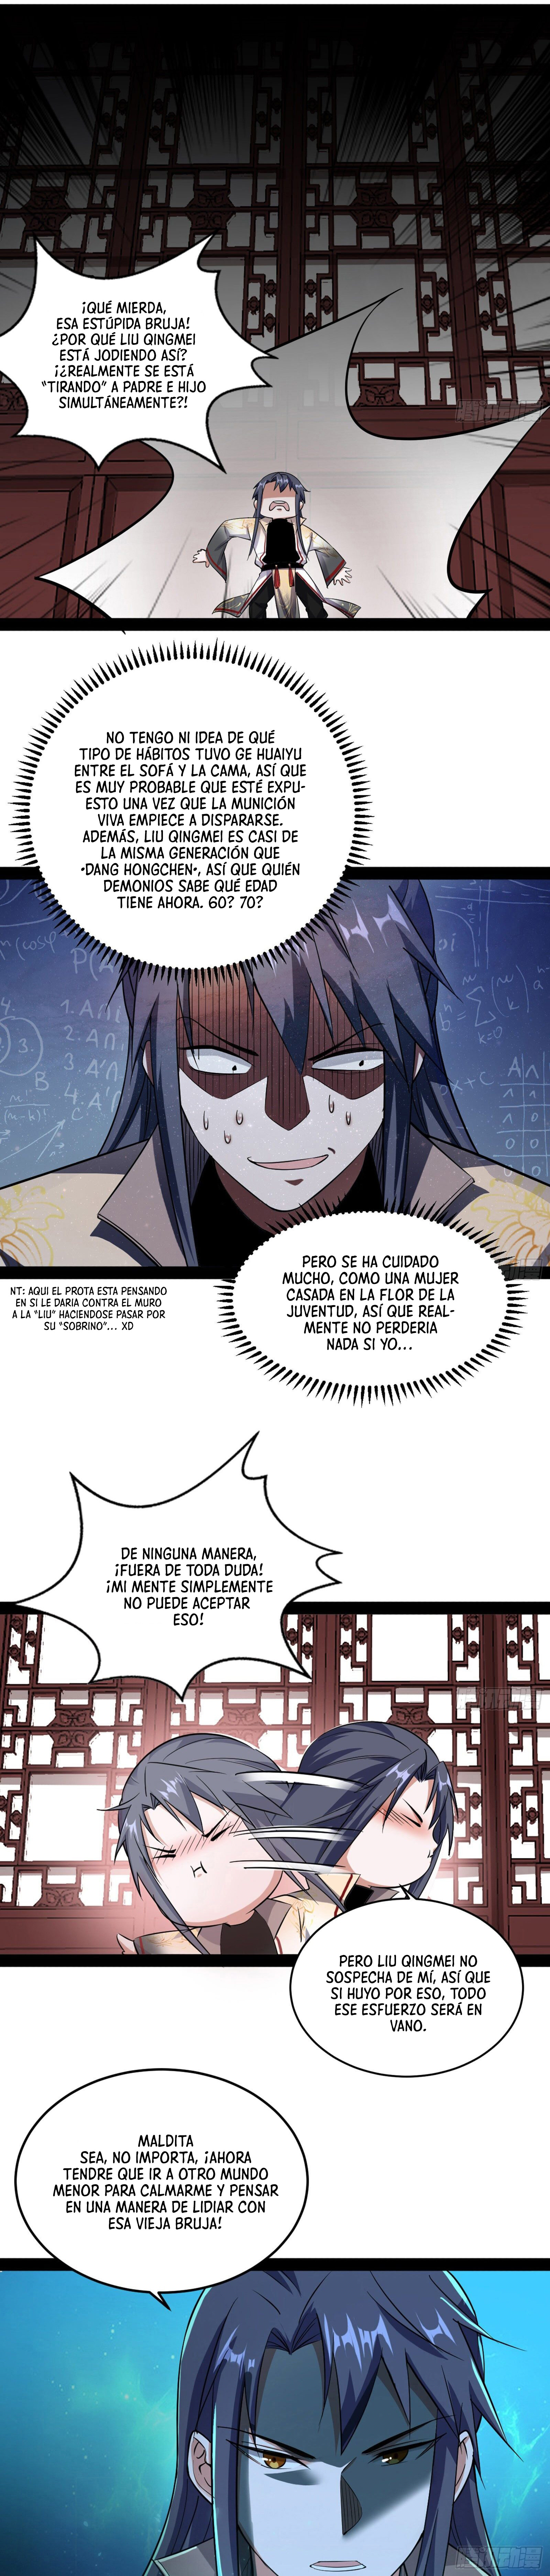 Manga Soy un dios maligno Chapter 93 image number 4